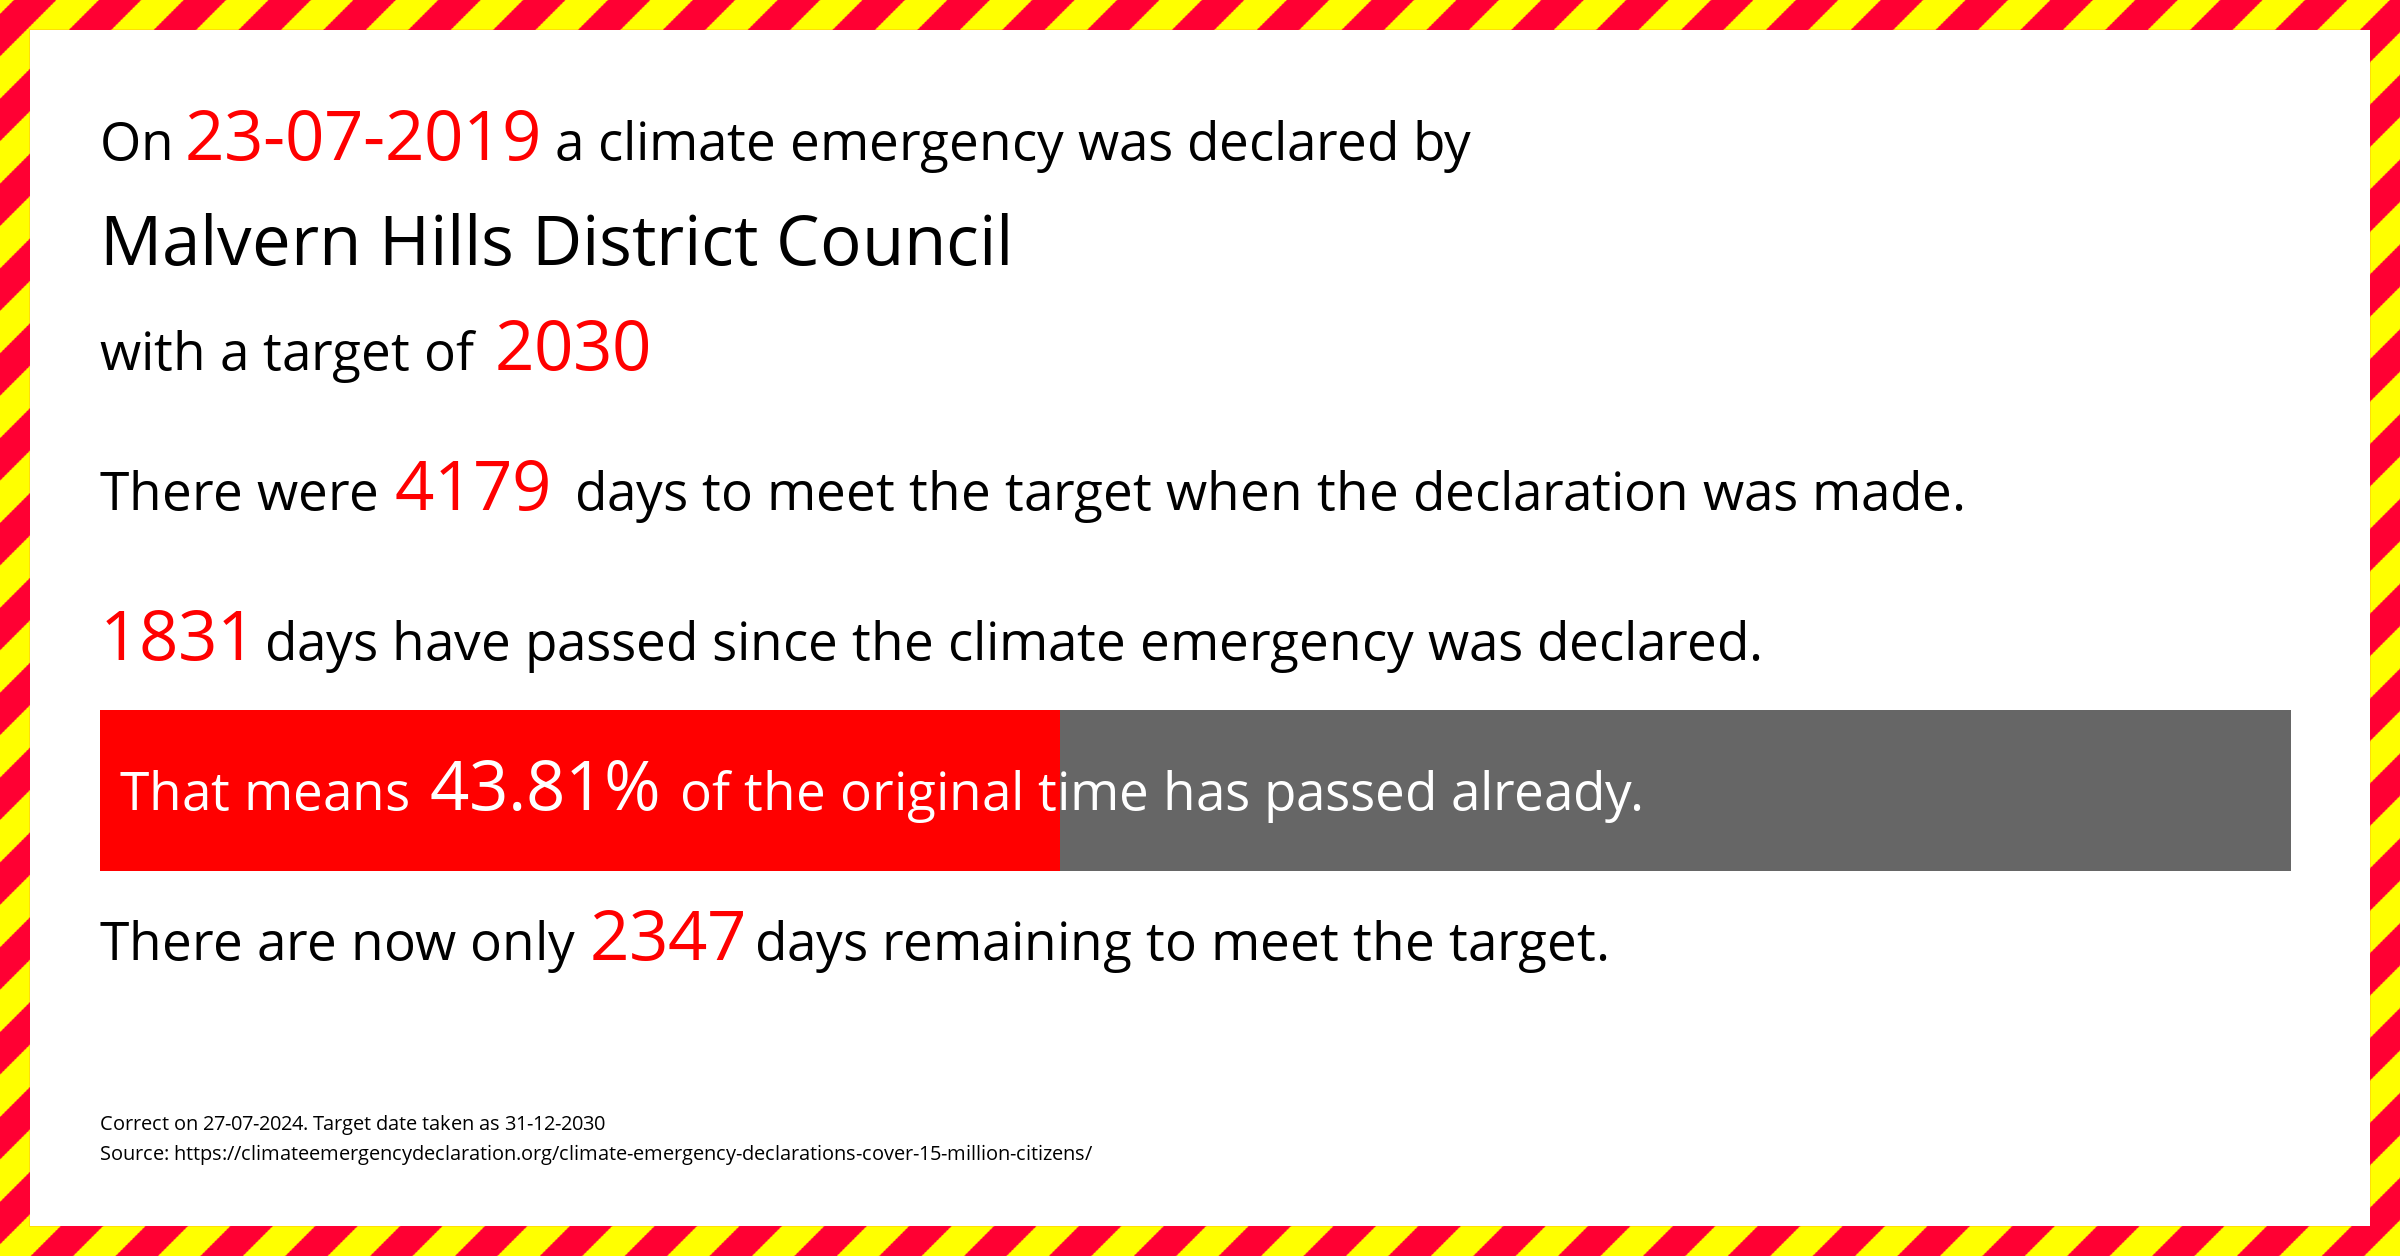 Malvern Hills District Council declared a Climate emergency on Tuesday 23rd July 2019, with a target of 2030.